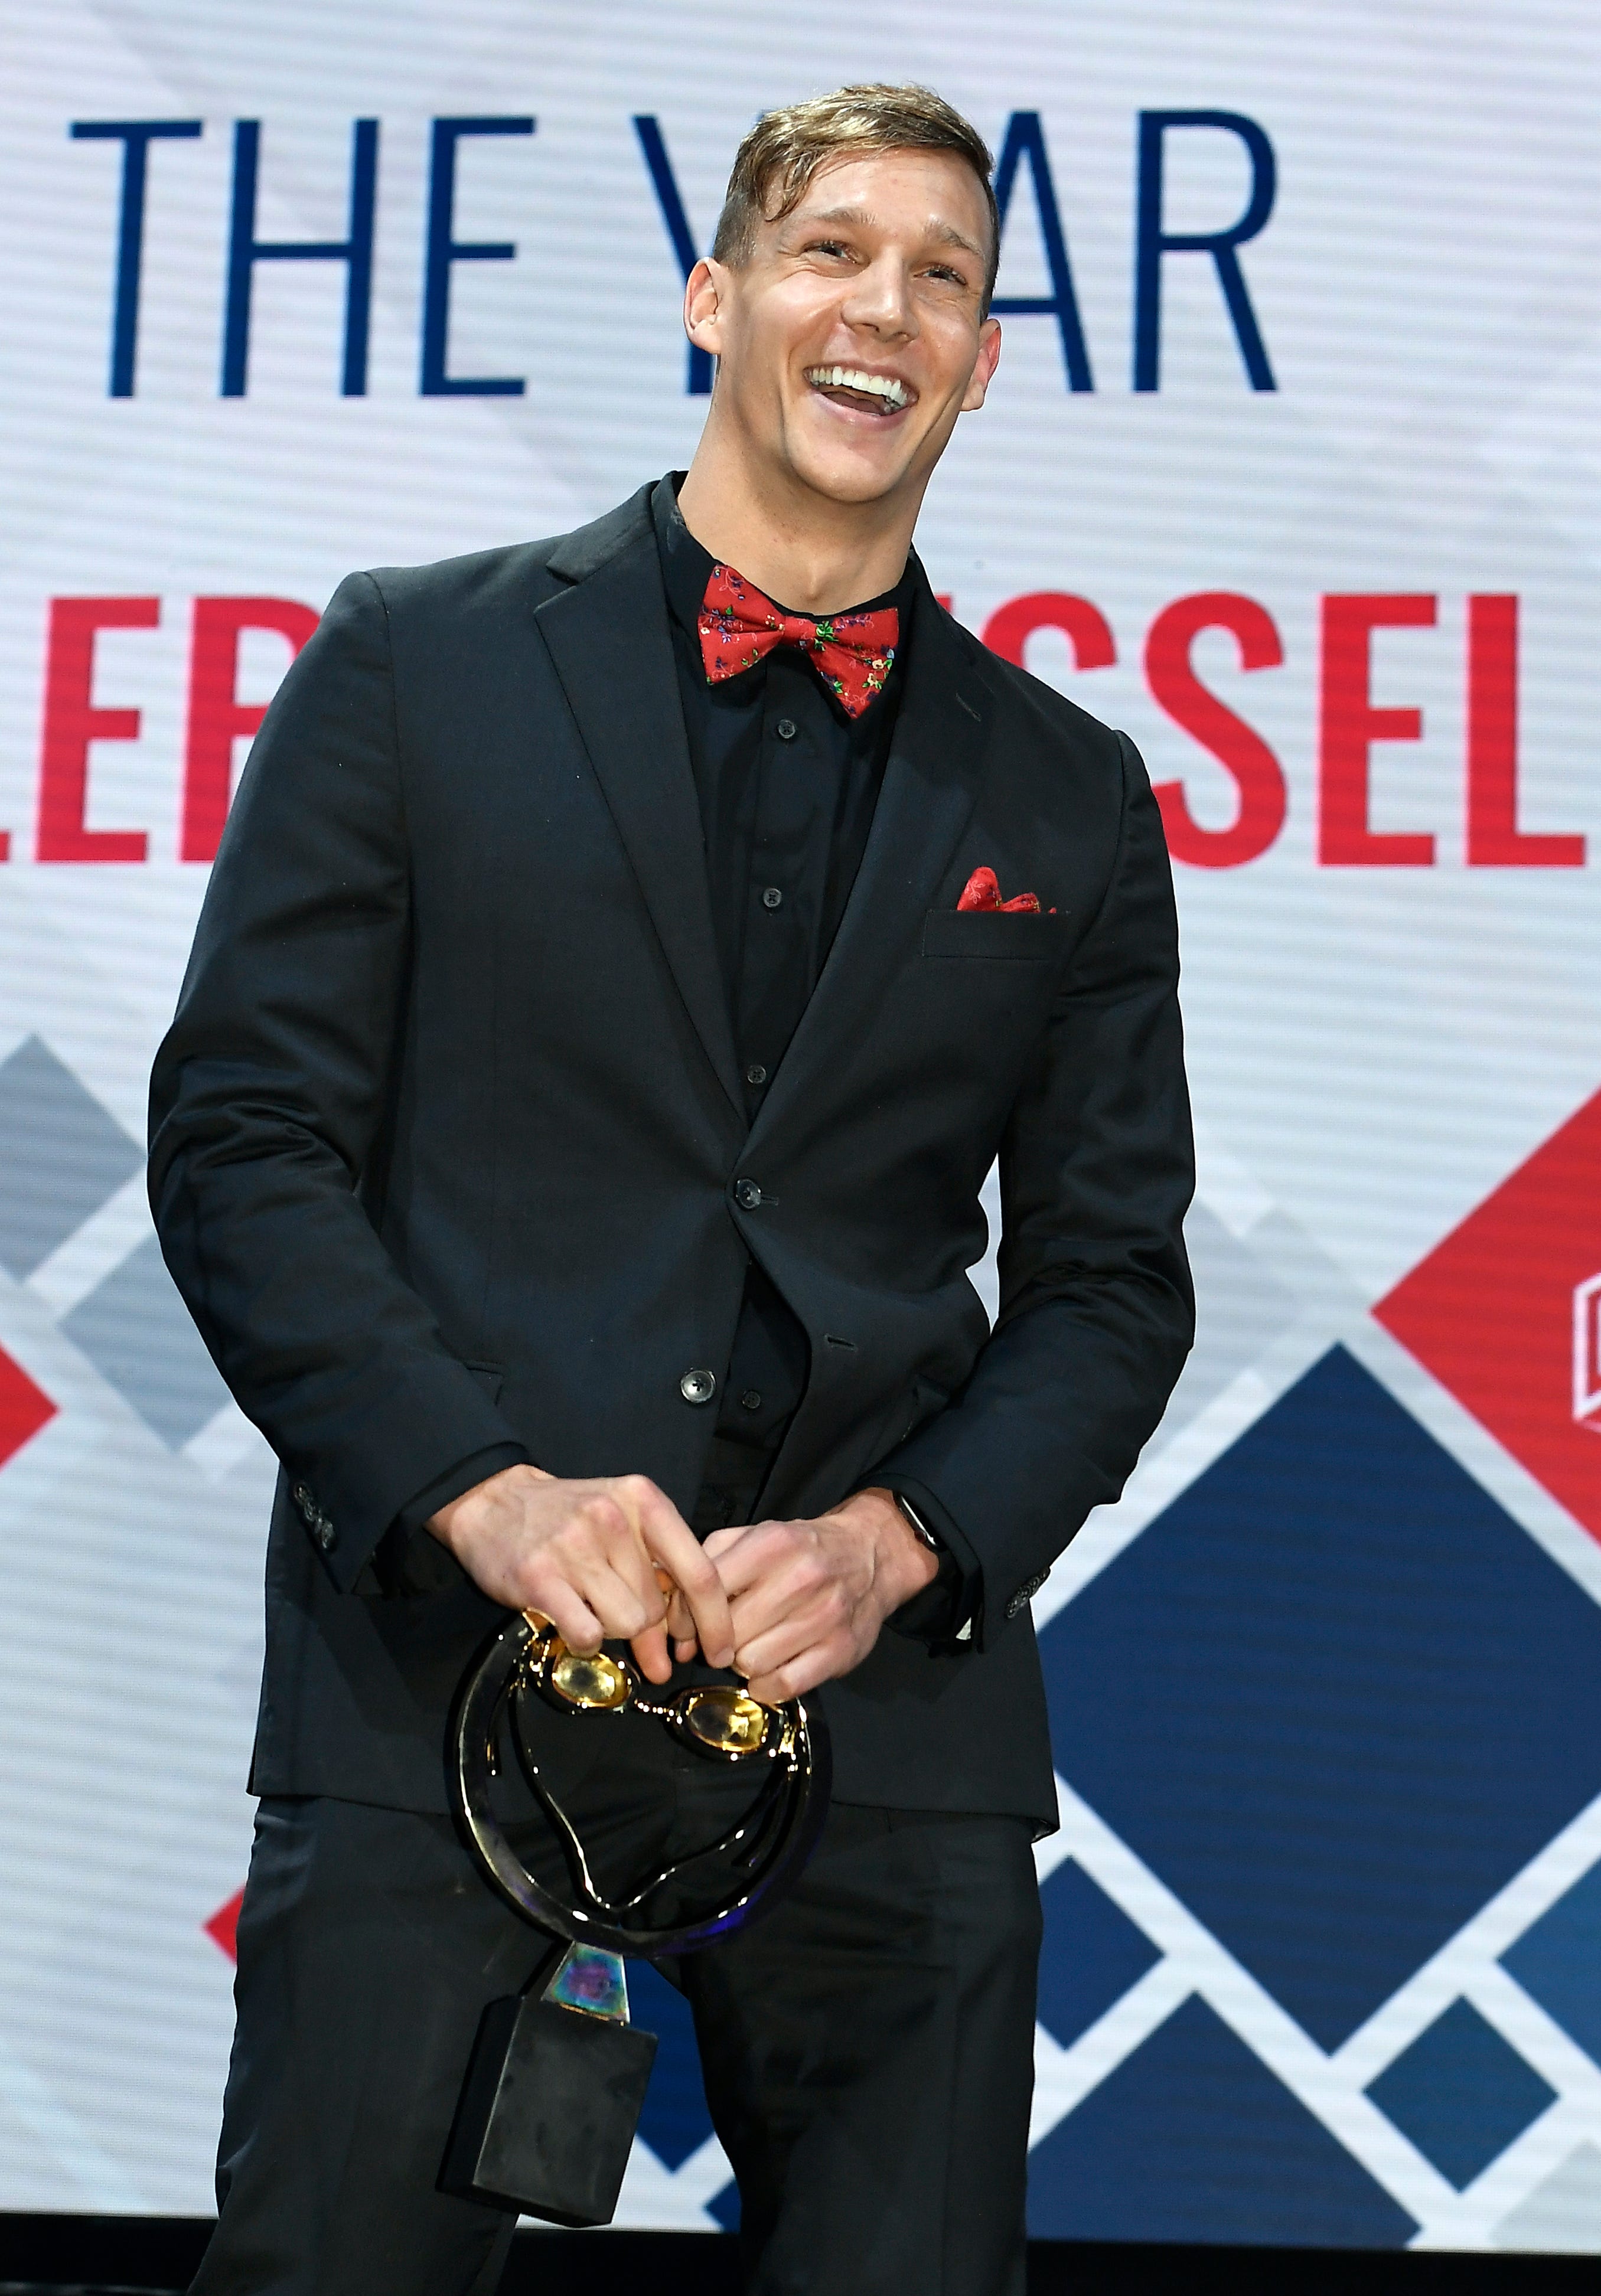 Caeleb Dressel receives the Male Athlete award during Golden Goggle Awards on November 24, 2019 in Los Angeles, California.